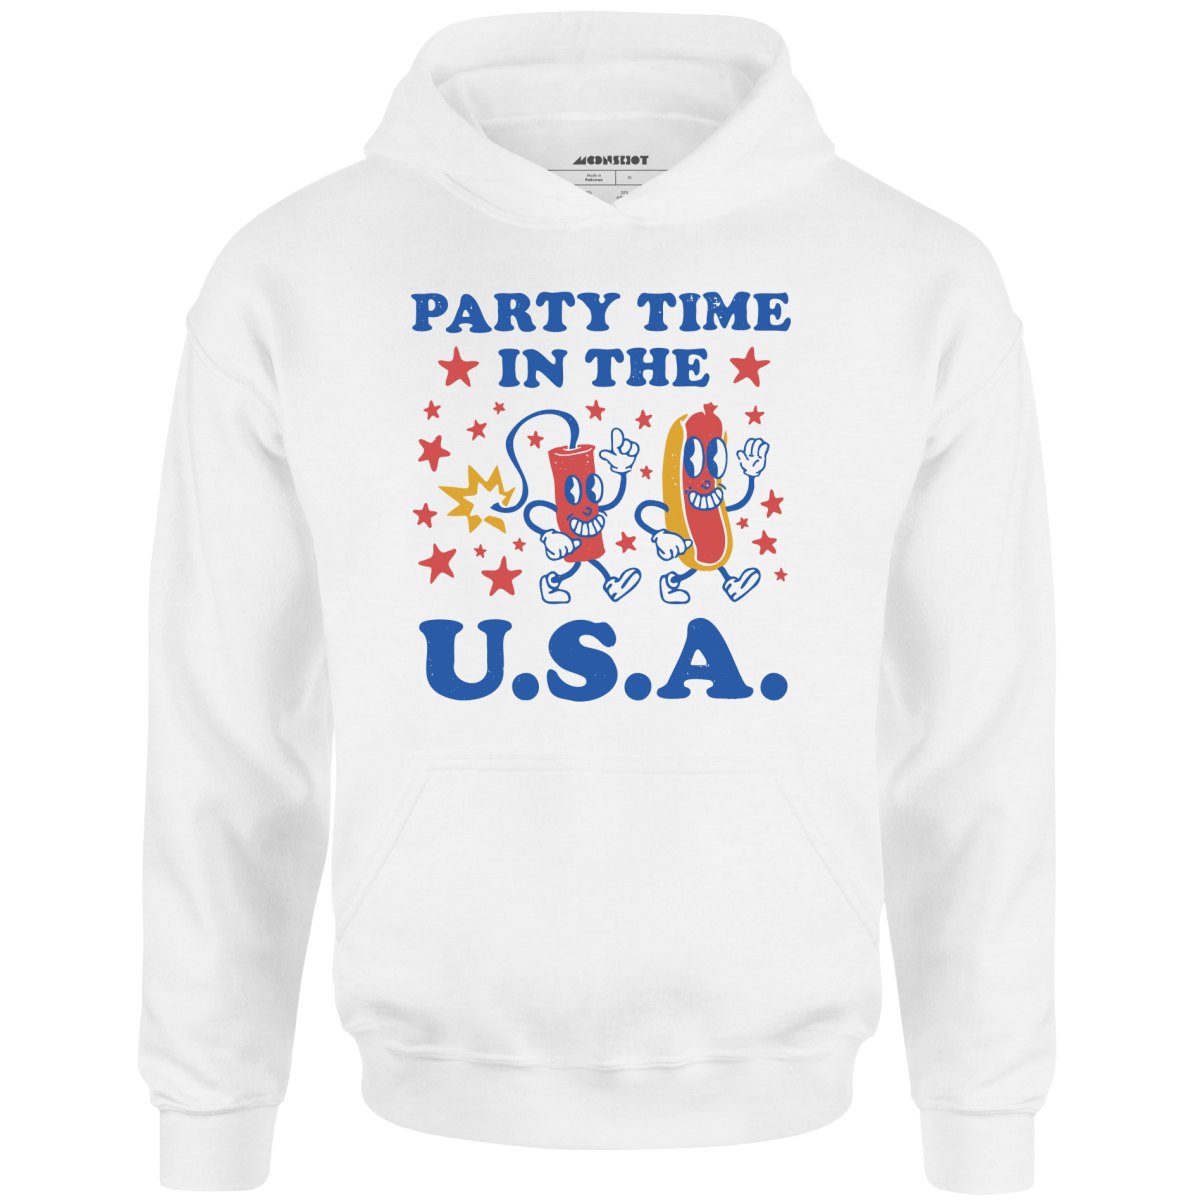 Party Time in The U.S.A. - Unisex Hoodie